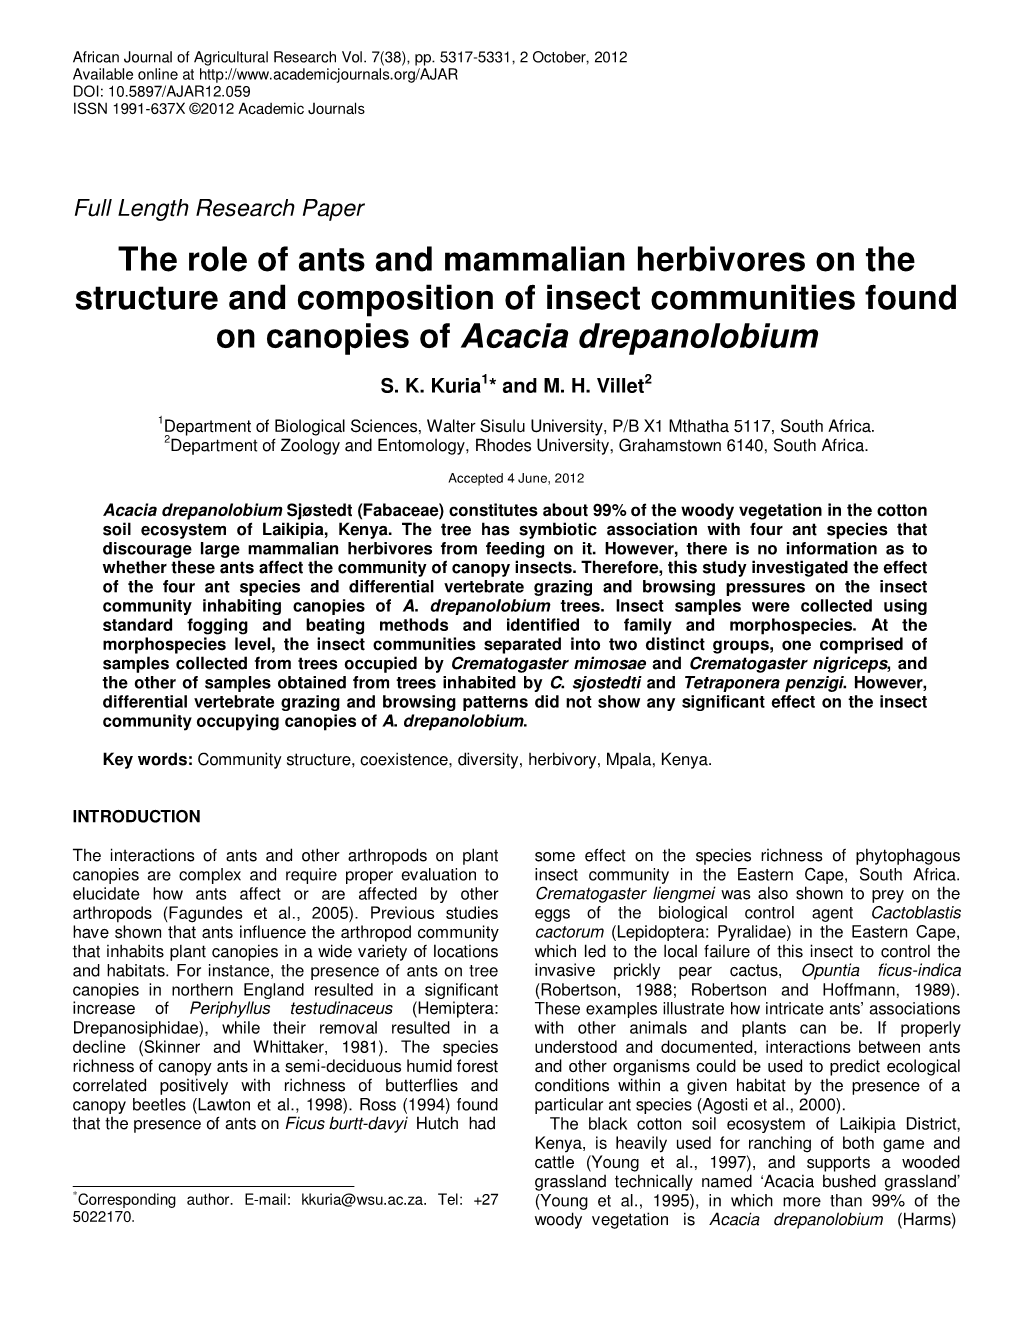 The Role of Ants and Mammalian Herbivores on the Structure and Composition of Insect Communities Found on Canopies of Acacia Drepanolobium